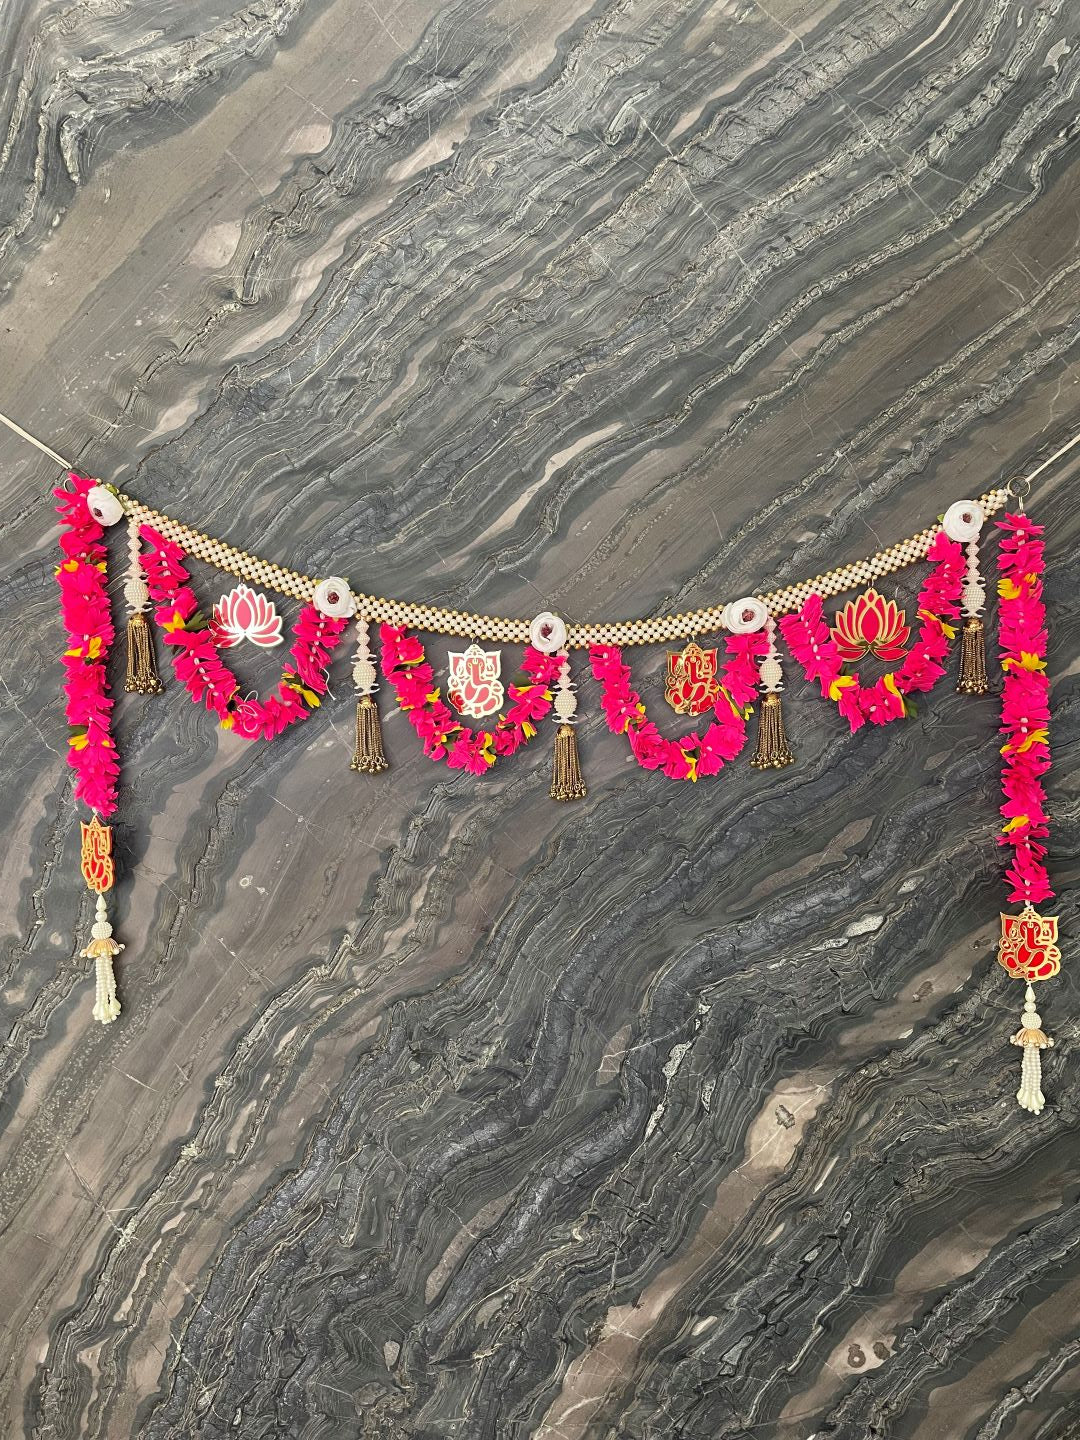 image for Ganesha & Pink Lotus Toran With Side Latkan For Door Hangings Diwali Decoration with Pearls & Pink Flowers